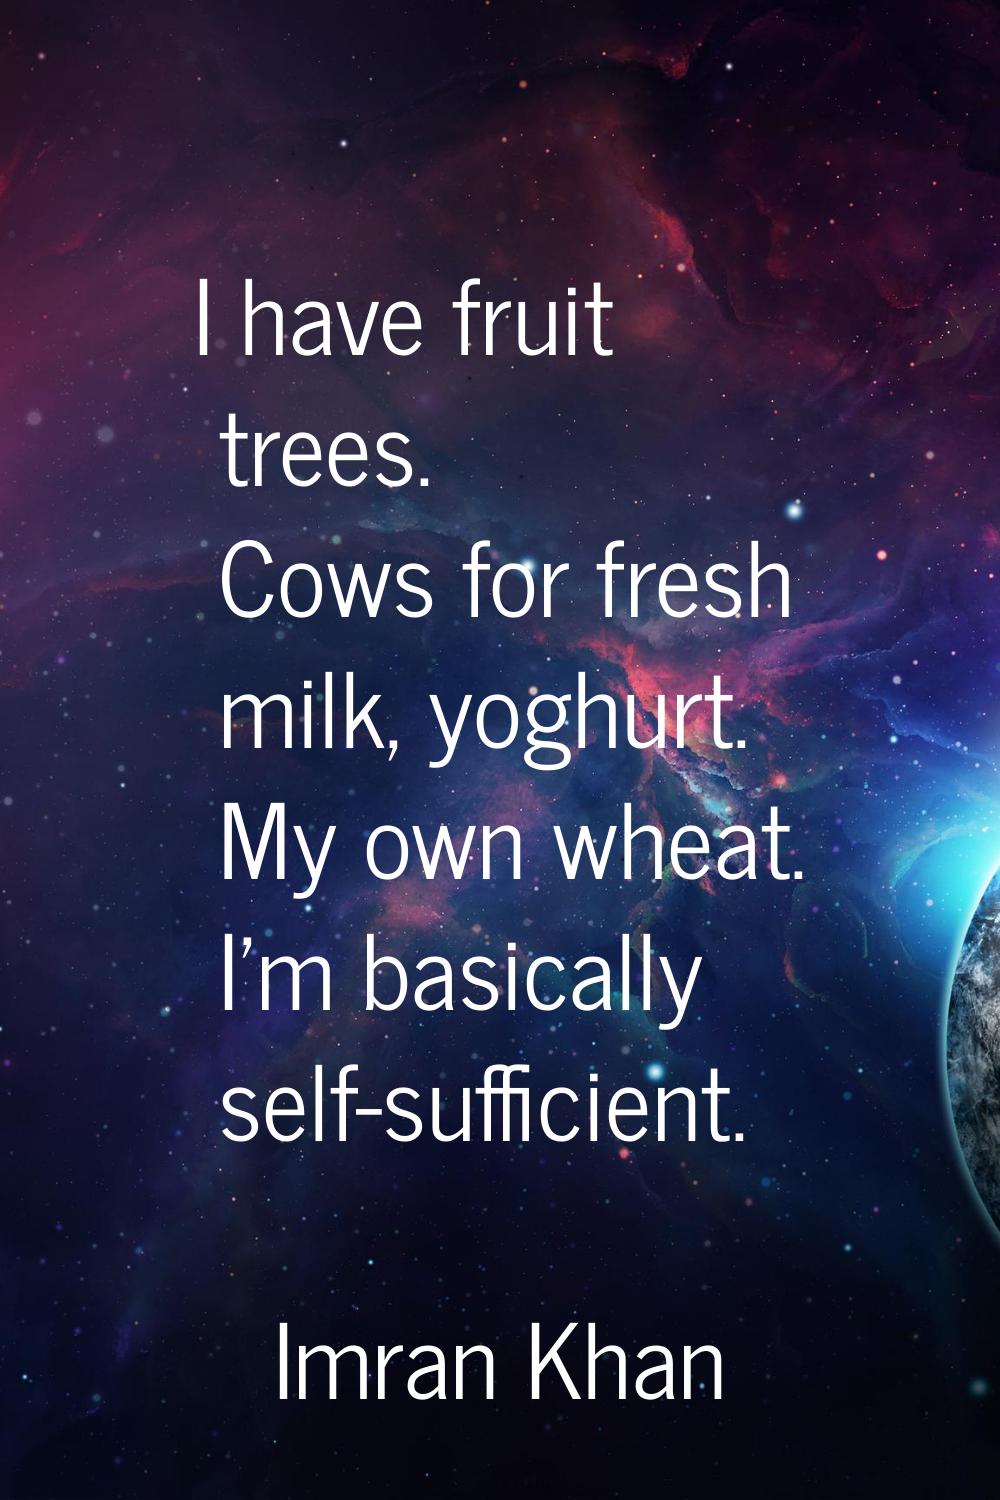 I have fruit trees. Cows for fresh milk, yoghurt. My own wheat. I'm basically self-sufficient.